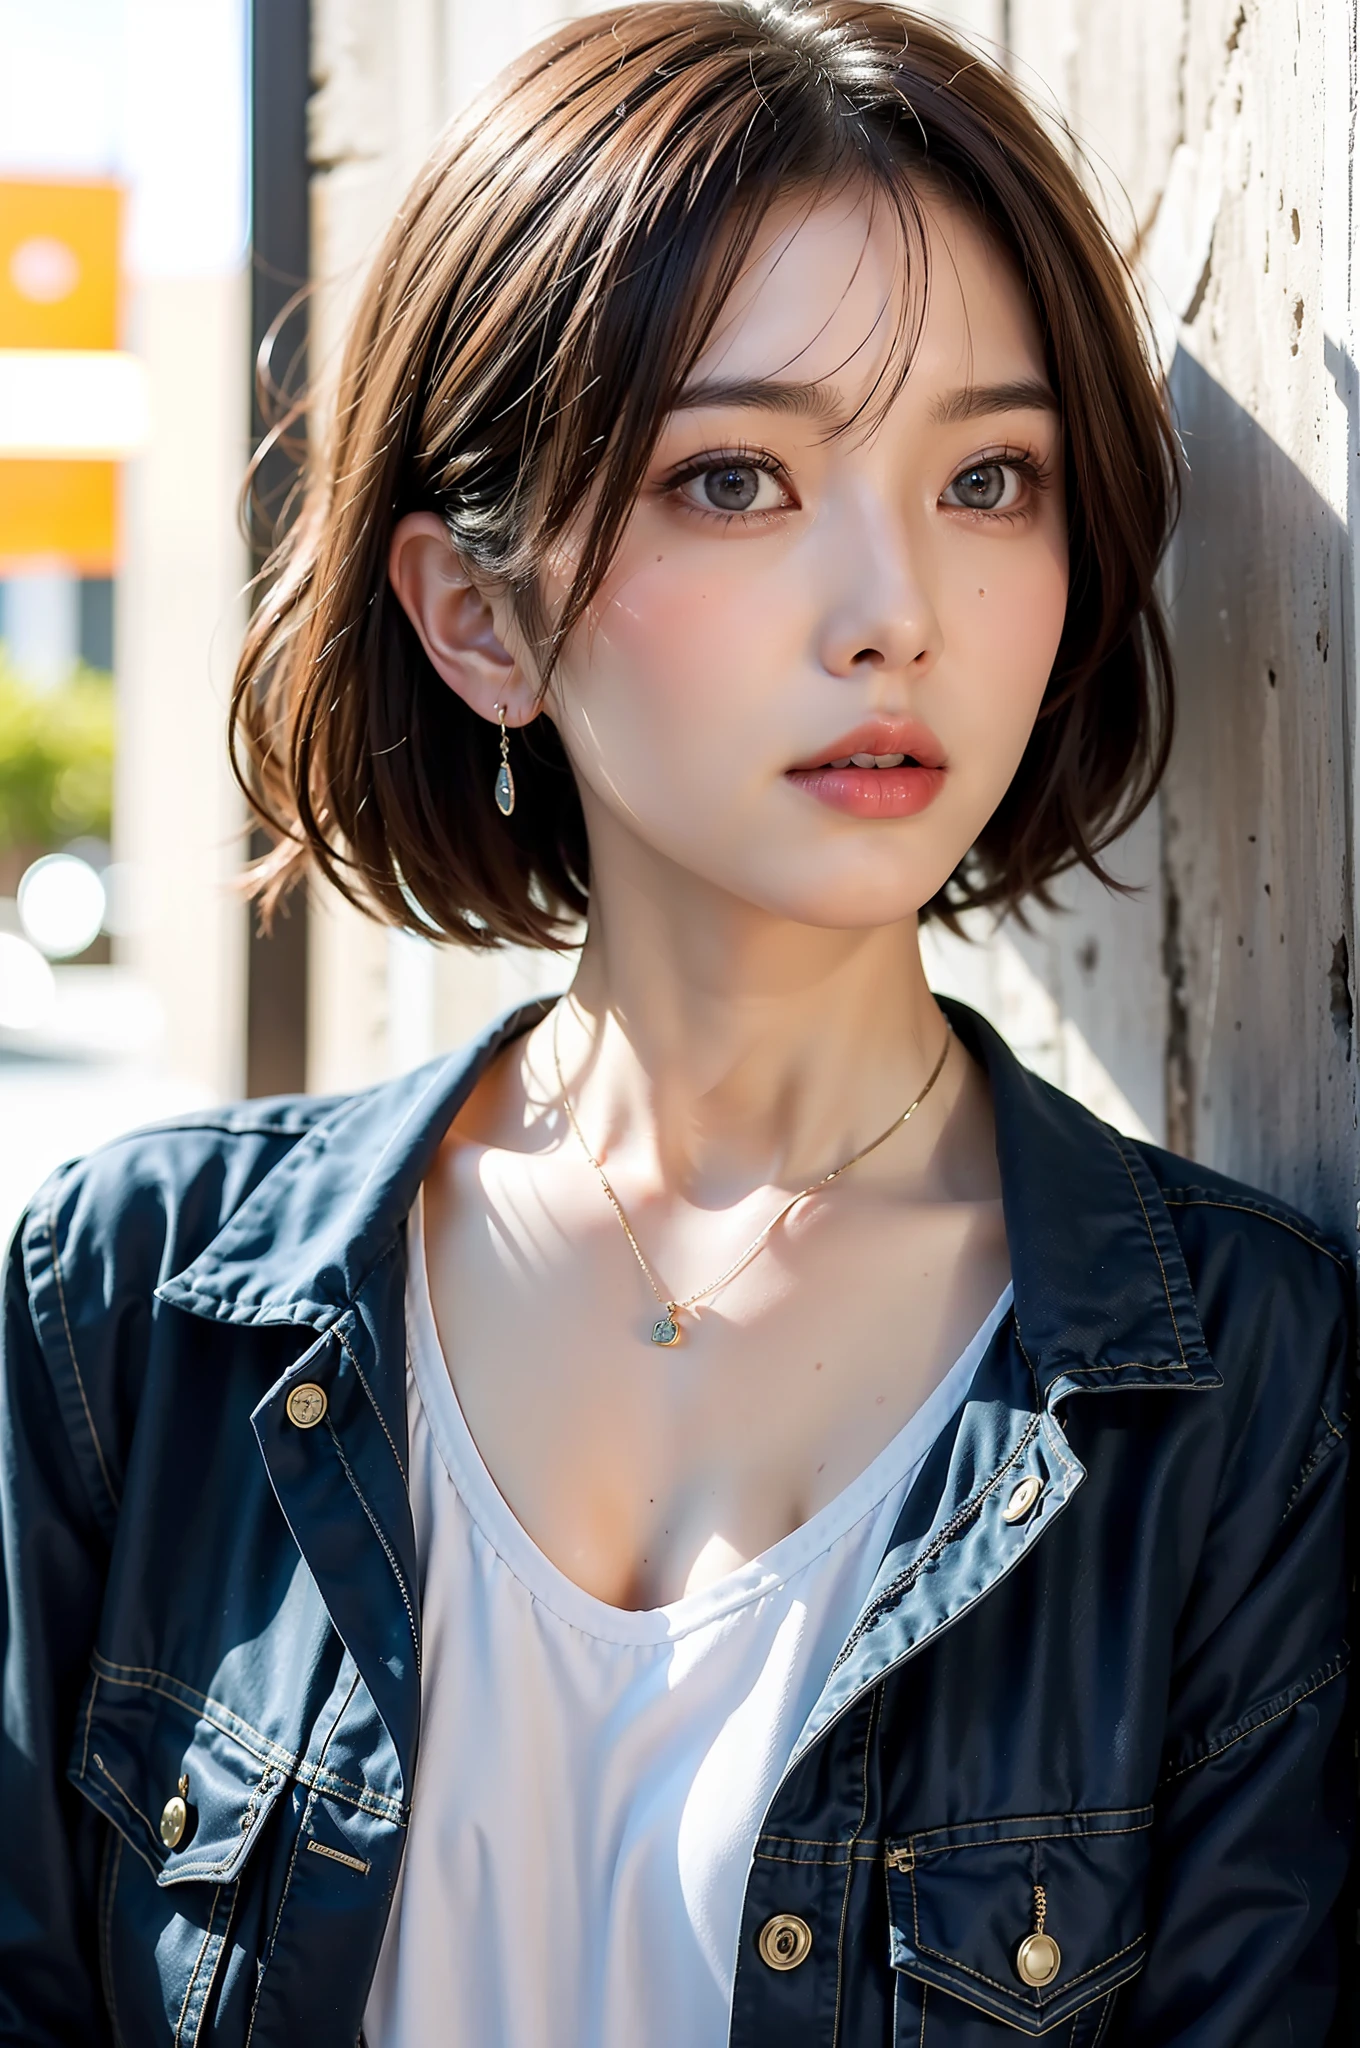 Best Quality, Master peace, Ultra high Resolution, (Realistic、、、、: 1.4), Original Photo, (True Skin Texture: 1.3), (Film Grain: 1.3), panorama, Portrait, Very Wide Lens, narrow waists, Denim Lens, (In the Dark, Deep Shadows, Low profile, Cold Light,) Night, Close-up, teardrops,ple short hair、the neck is long、Put your ears out、bangs、big Eyes、Light-colored eyes、inside the house, dust, tyndall effects,(expression), sitting, (against the wall), (looking awdown), nervousness, teardrops,1 girl smiling happily, beautiful detail eyes and face, white jabot, pink dark V, BROWN EYES,